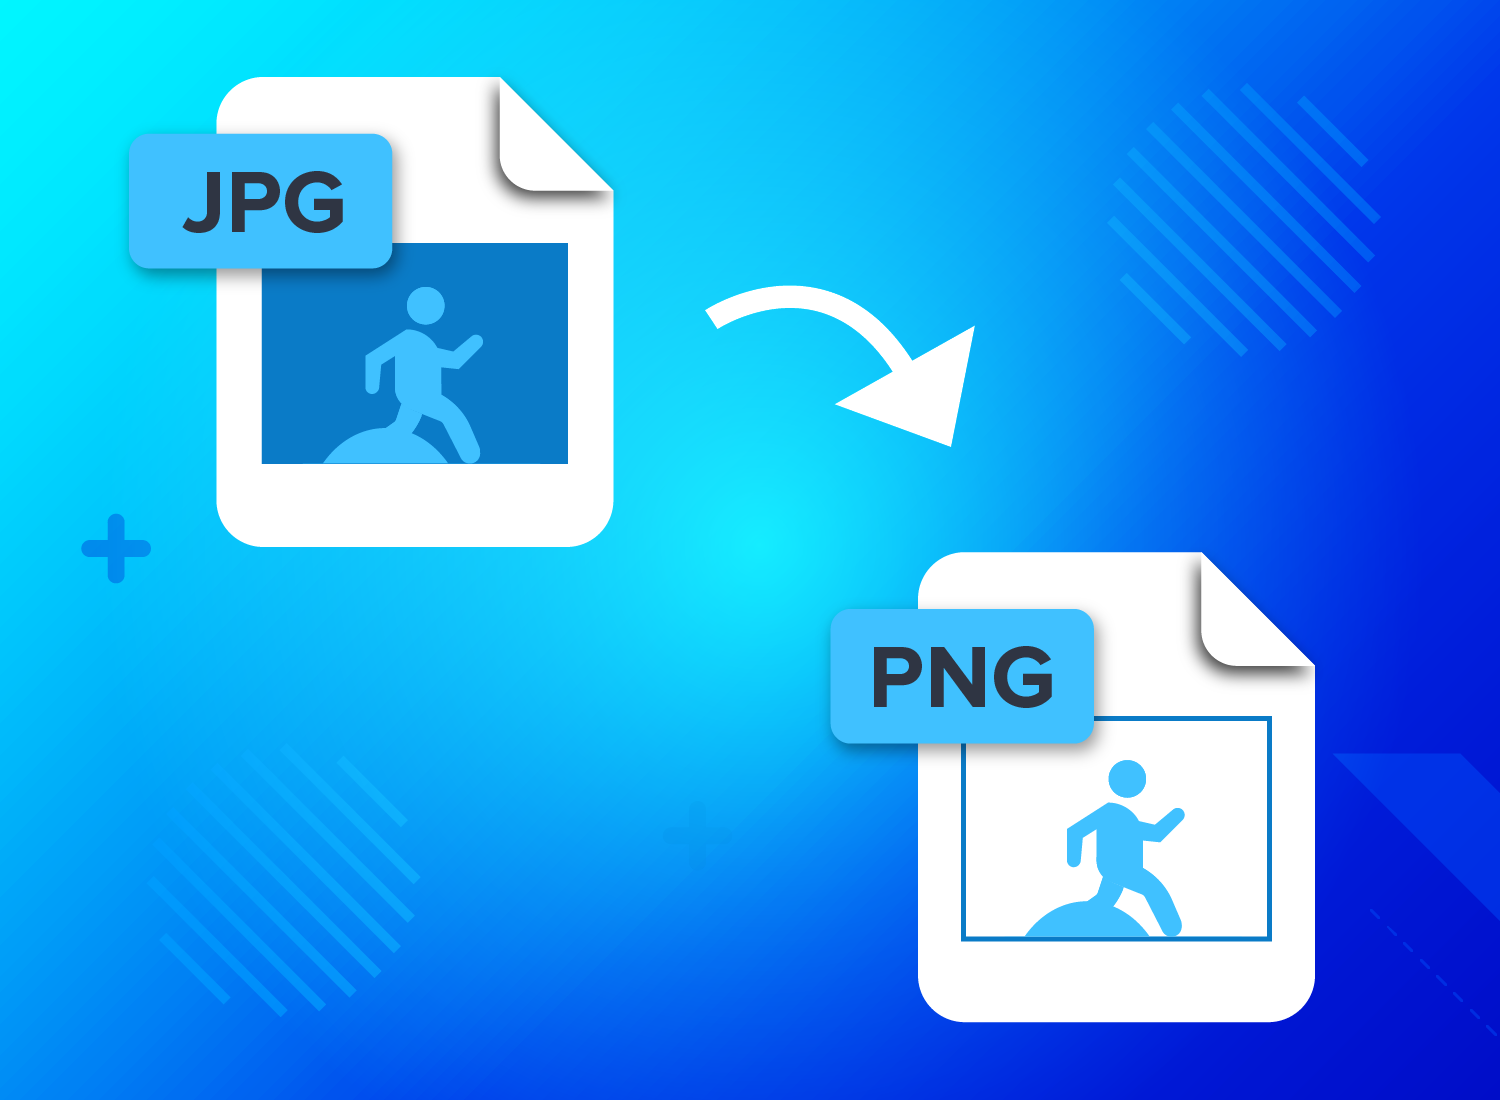 Differences between JPG and PNG